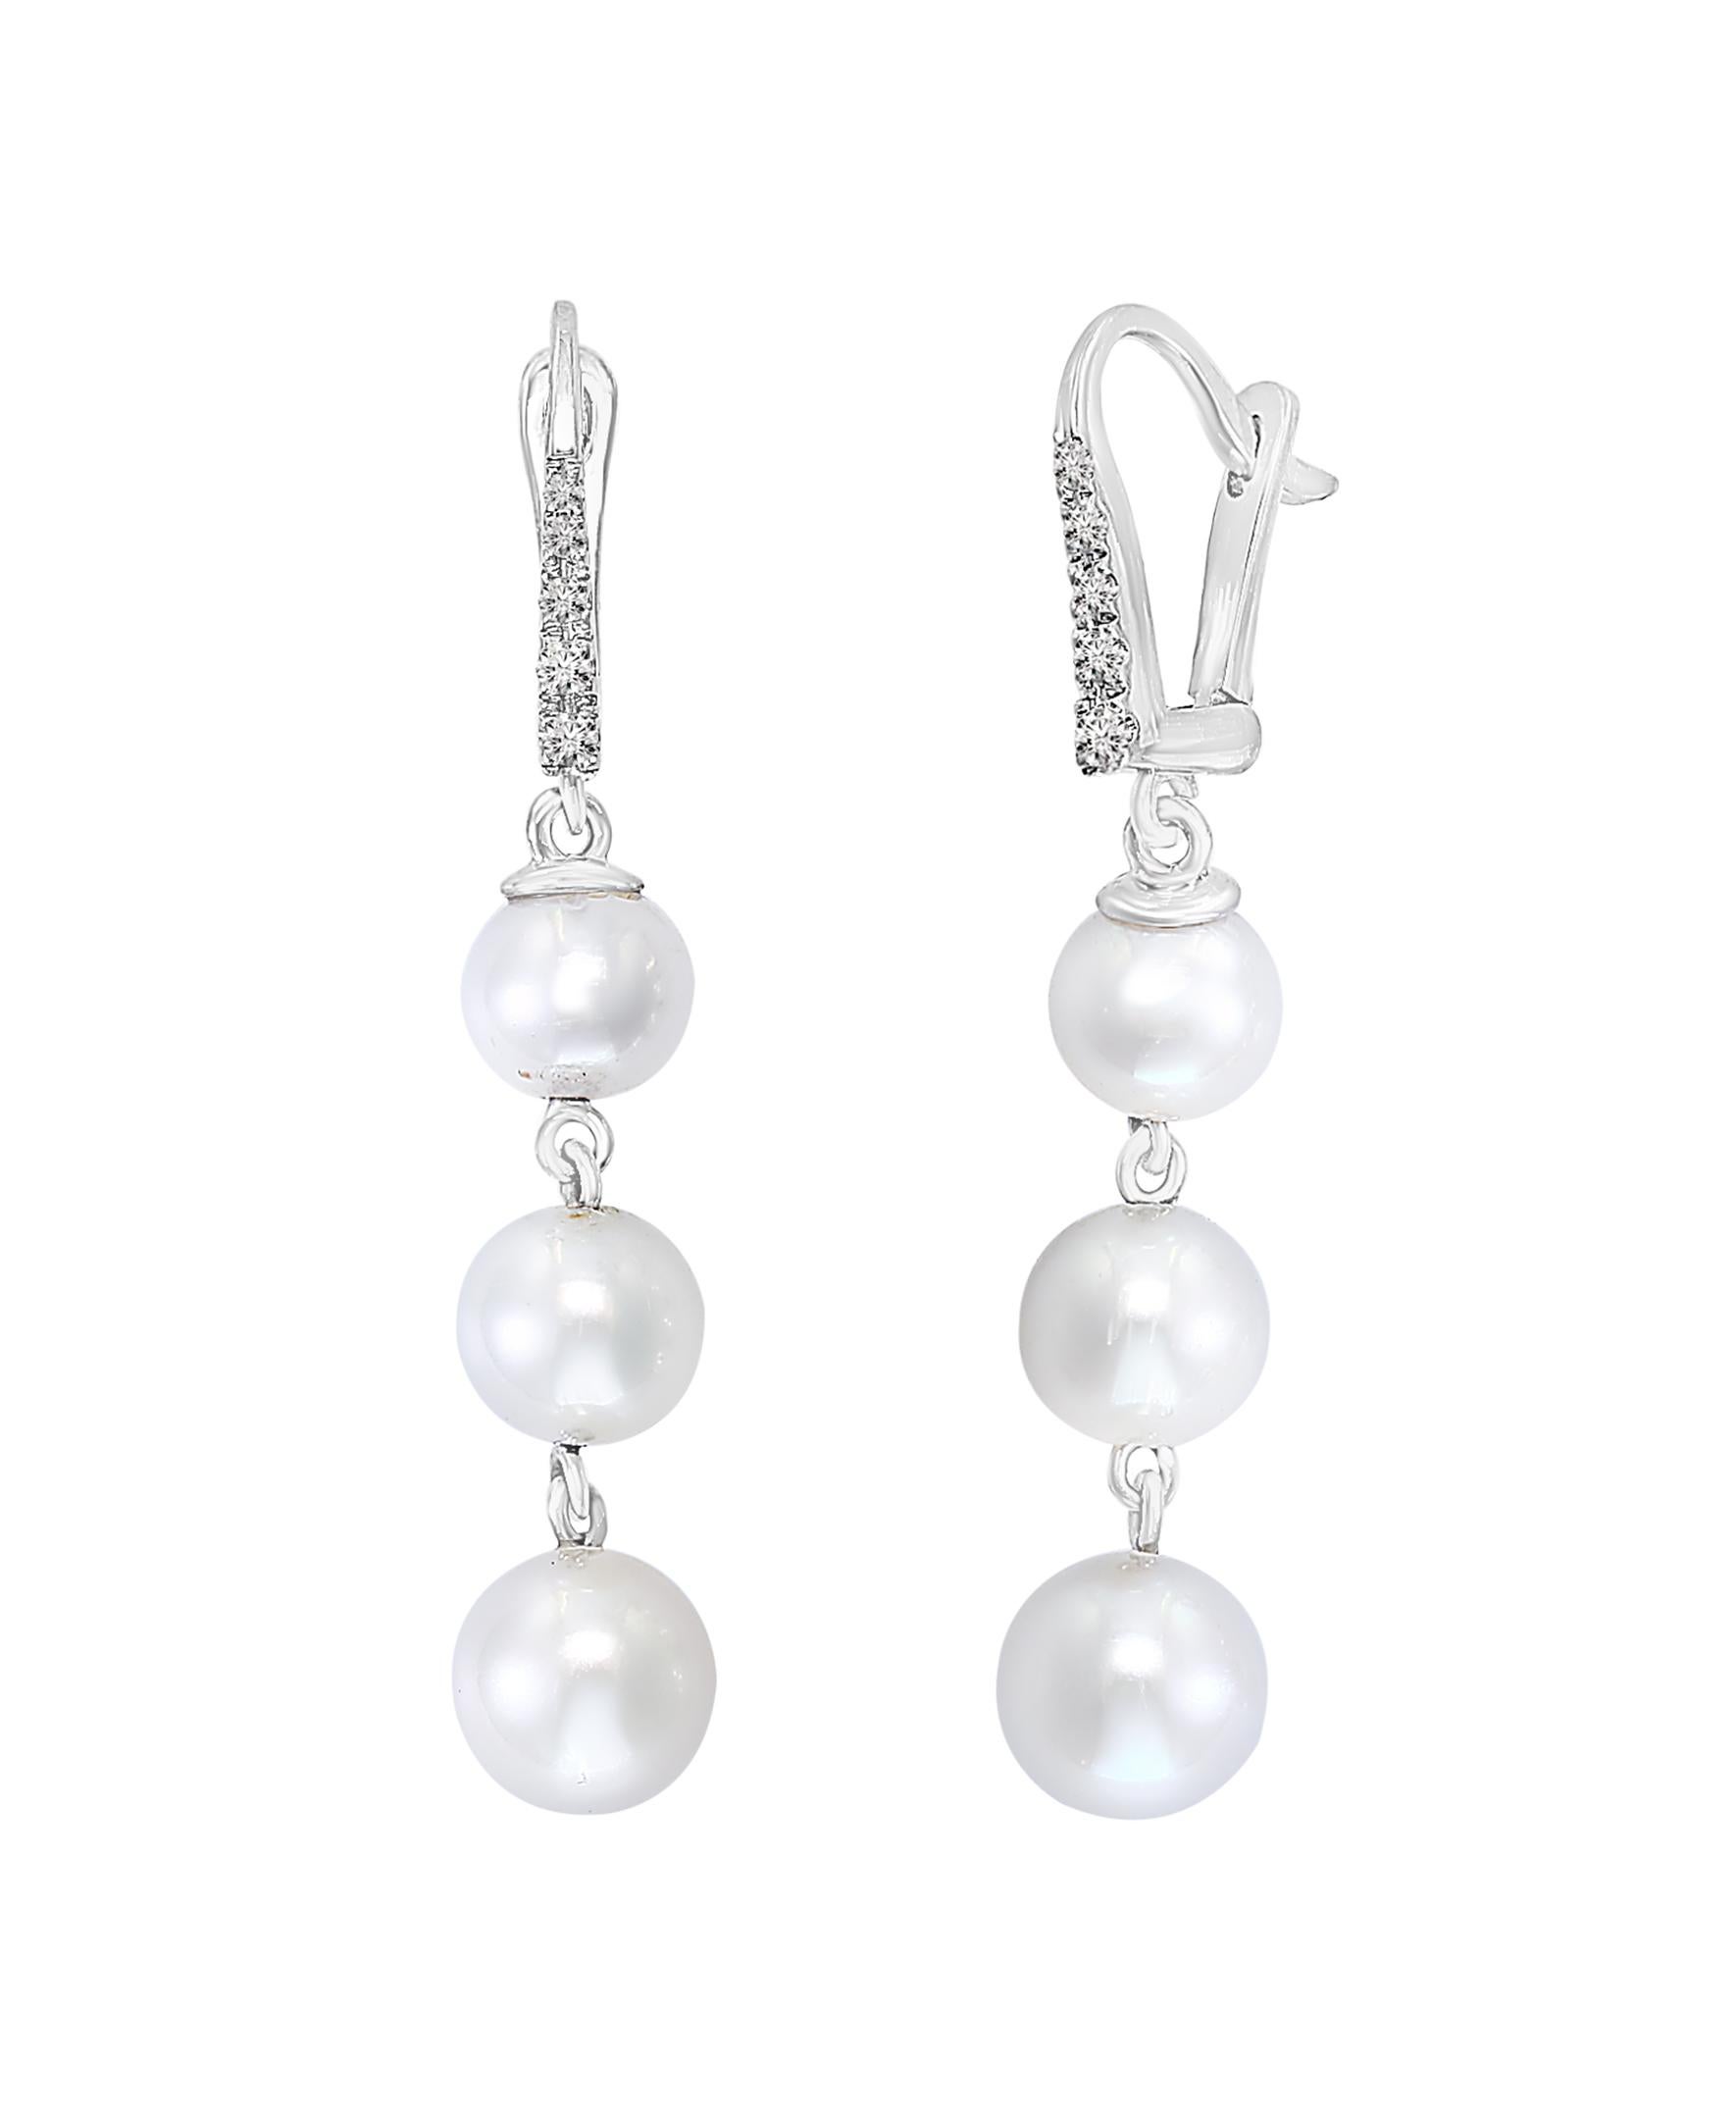 The cultured freshwater pearl earrings feature graduating 6-6.5mm, 6.5-7mm, and 7-7.5mm pearls. 
The pearls dangle off of a 14K white gold leverback with 0.085 total carats of diamonds. 
Great for everyday wear or for a dressy occasion, these